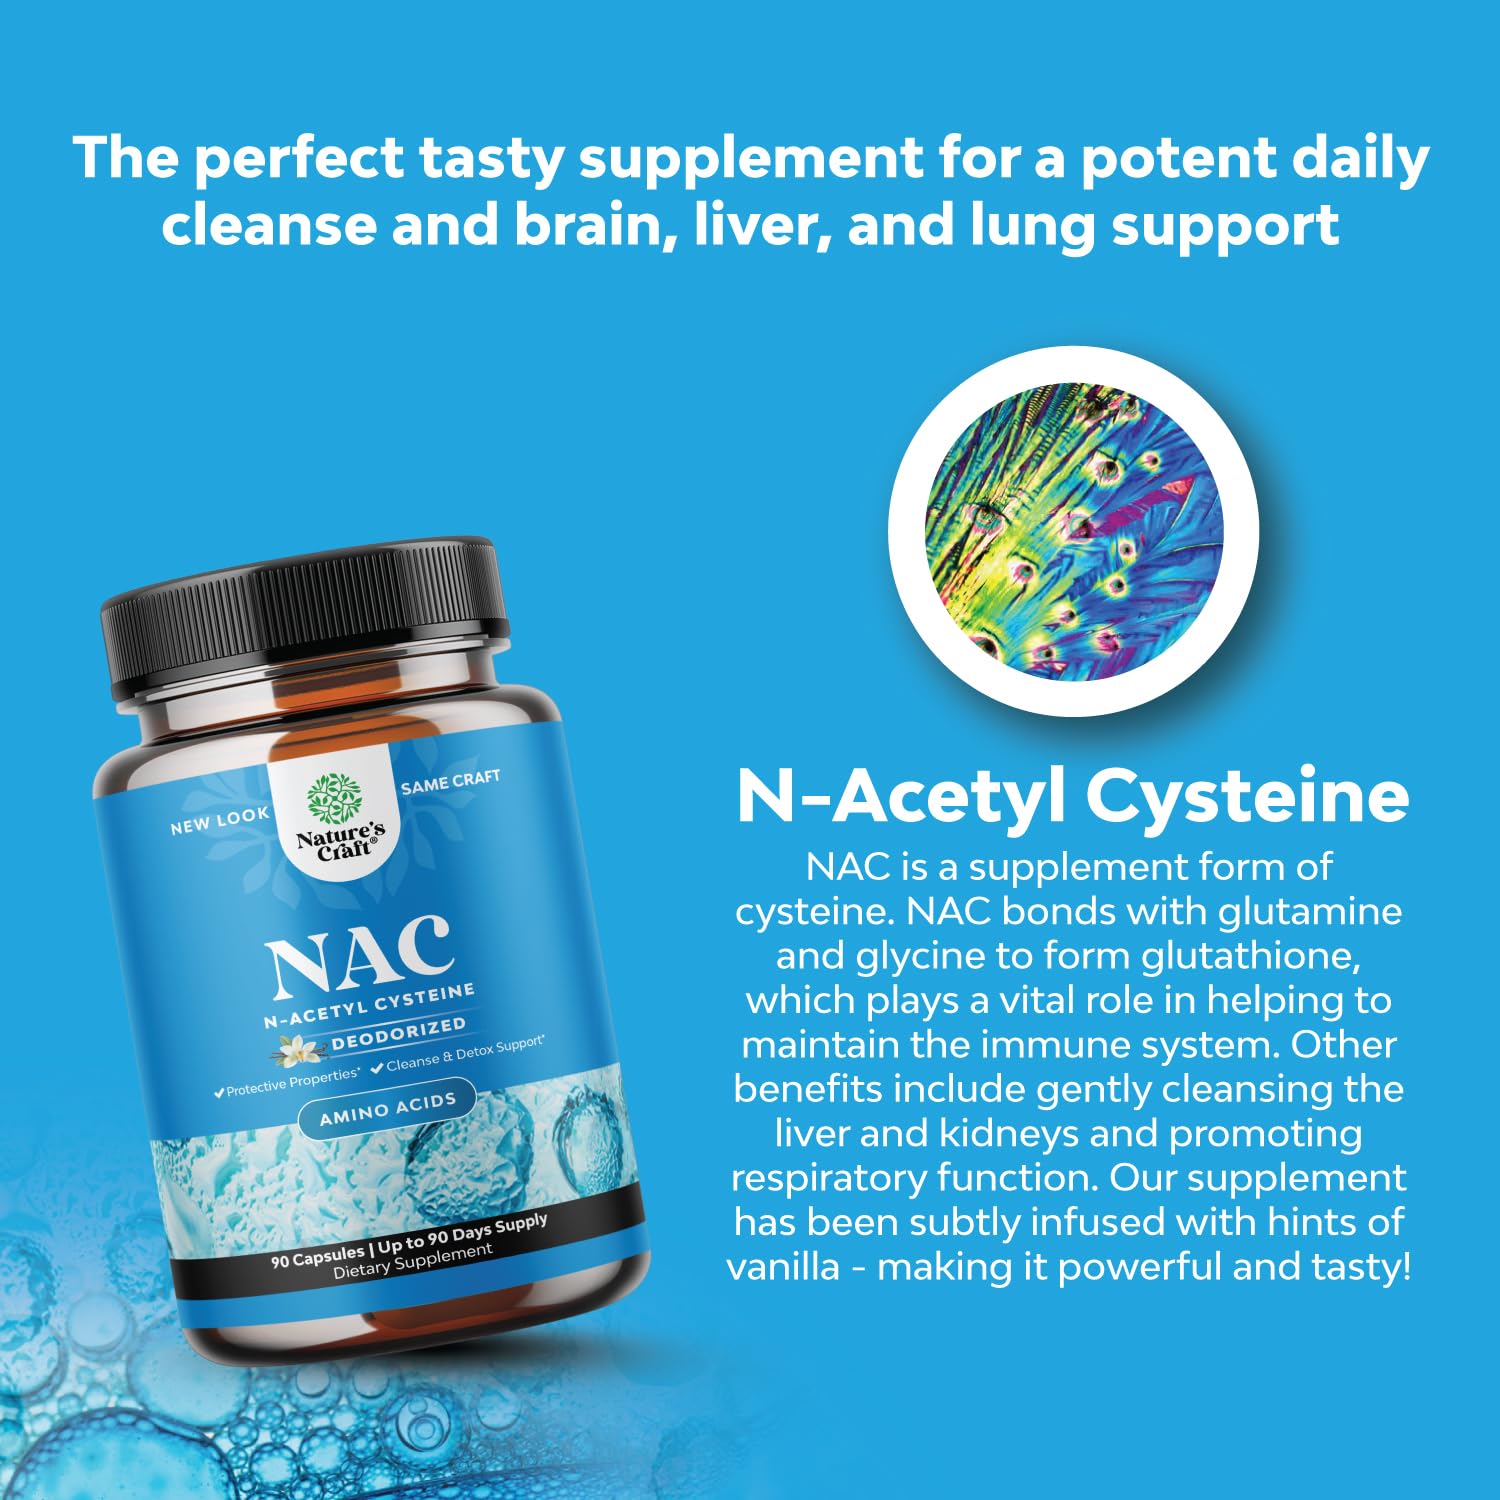 Bundle of Liver Cleanse Detox & Repair Formula and NAC Supplement N-Acetyl Cysteine 600mg - Herbal Liver Support Supplement with Milk Thistle - High Absorption NAC 600 mg Capsules Glutathione